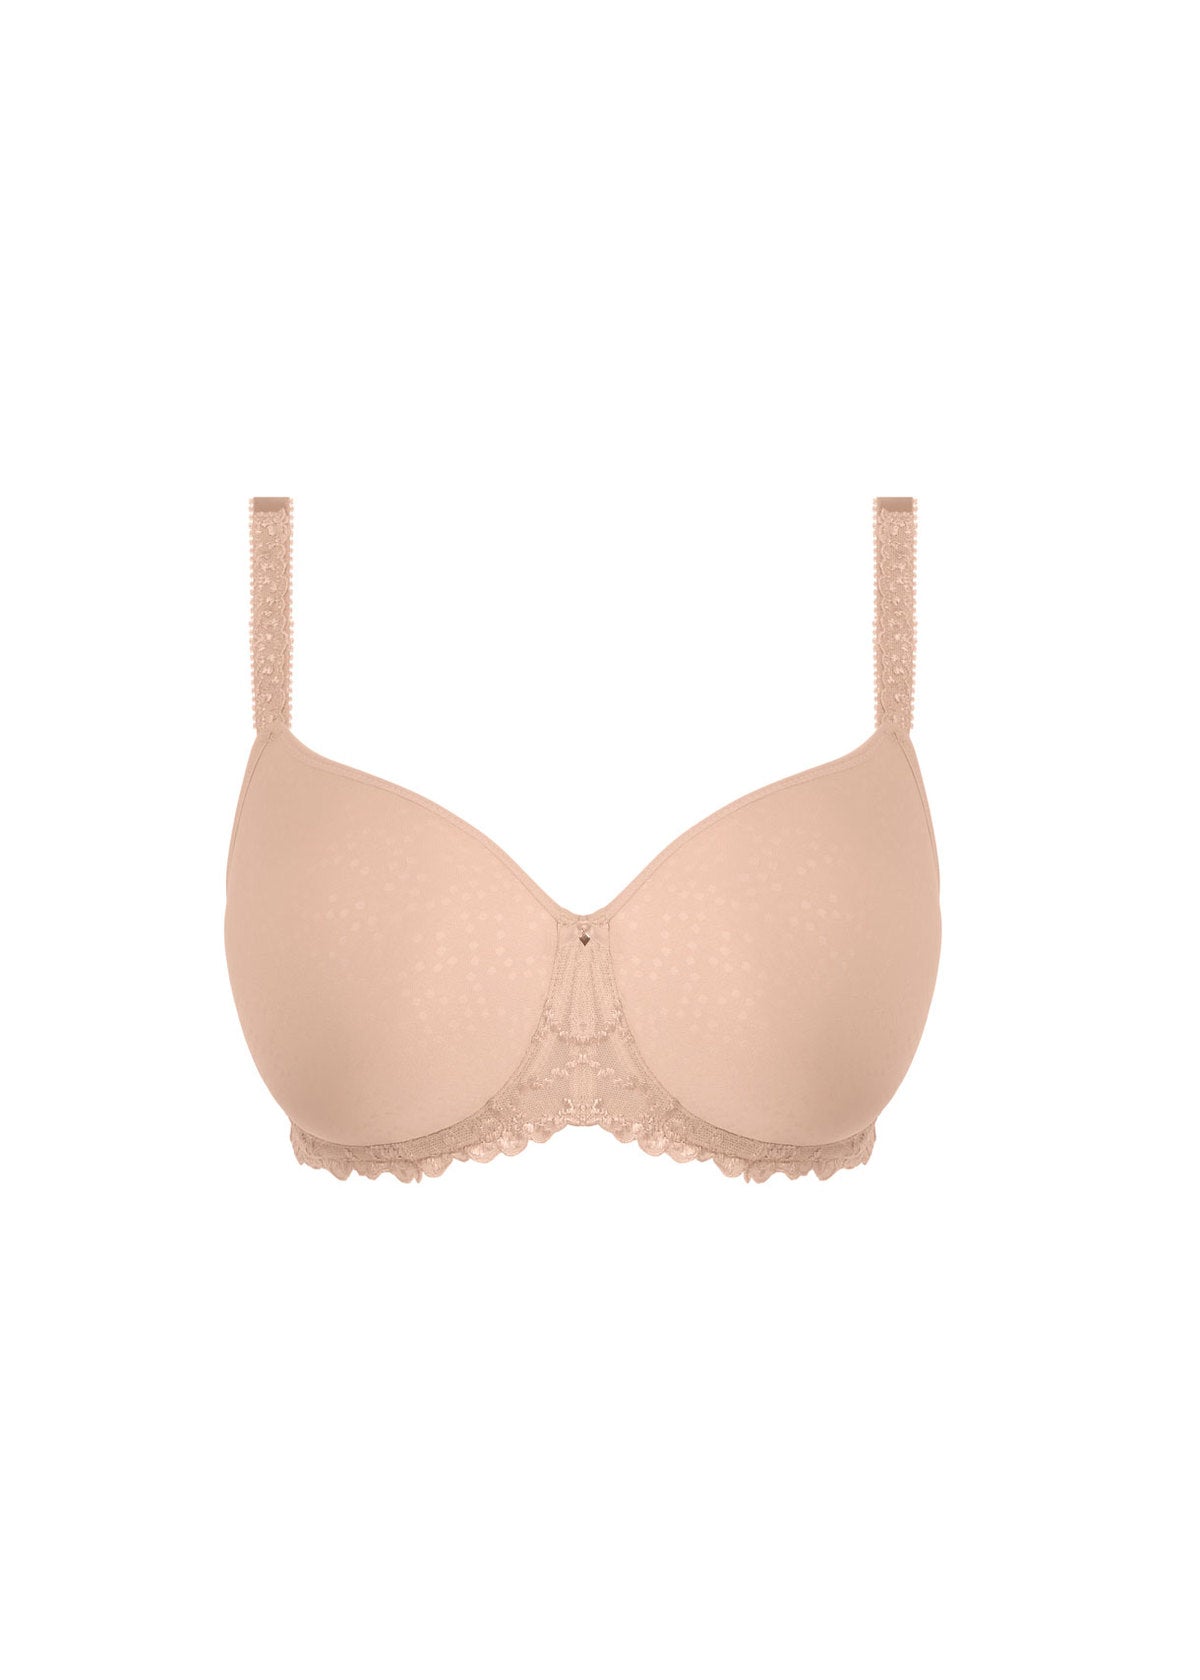 Ana Spacer Moulded Bra In Natural Beige by Fantasie – My Bare Essentials